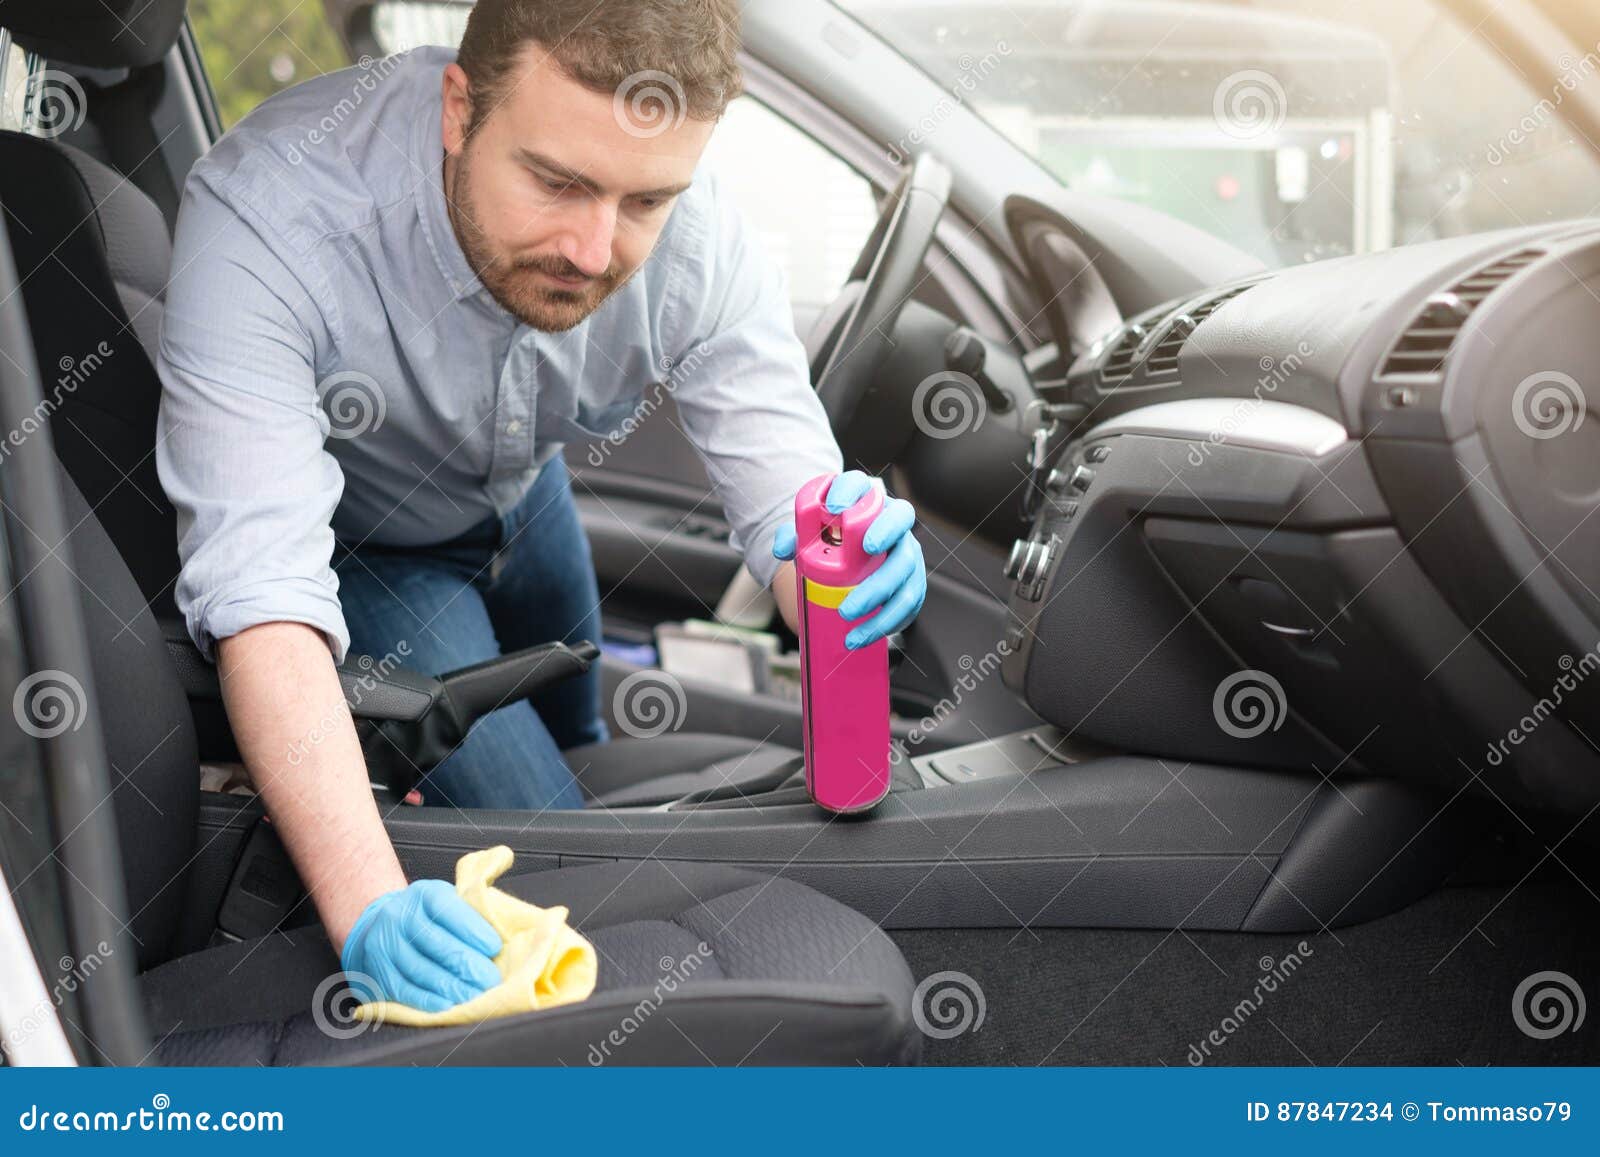 Man Cleaning His Car Interiors Stock Photo Image Of